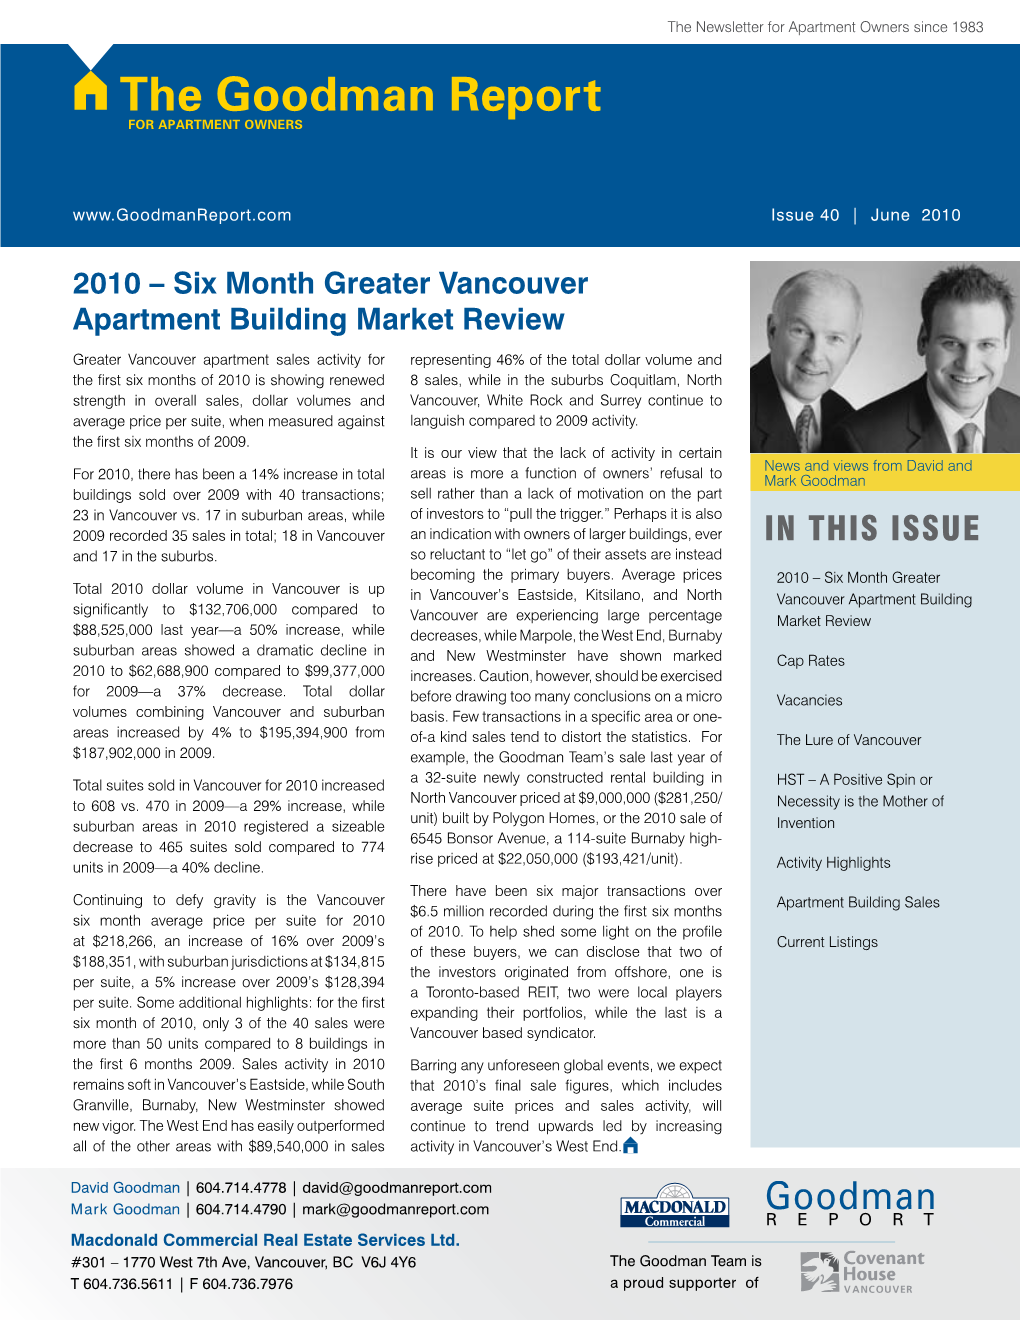 2010 – Six Month Greater Vancouver Apartment Building Market Review